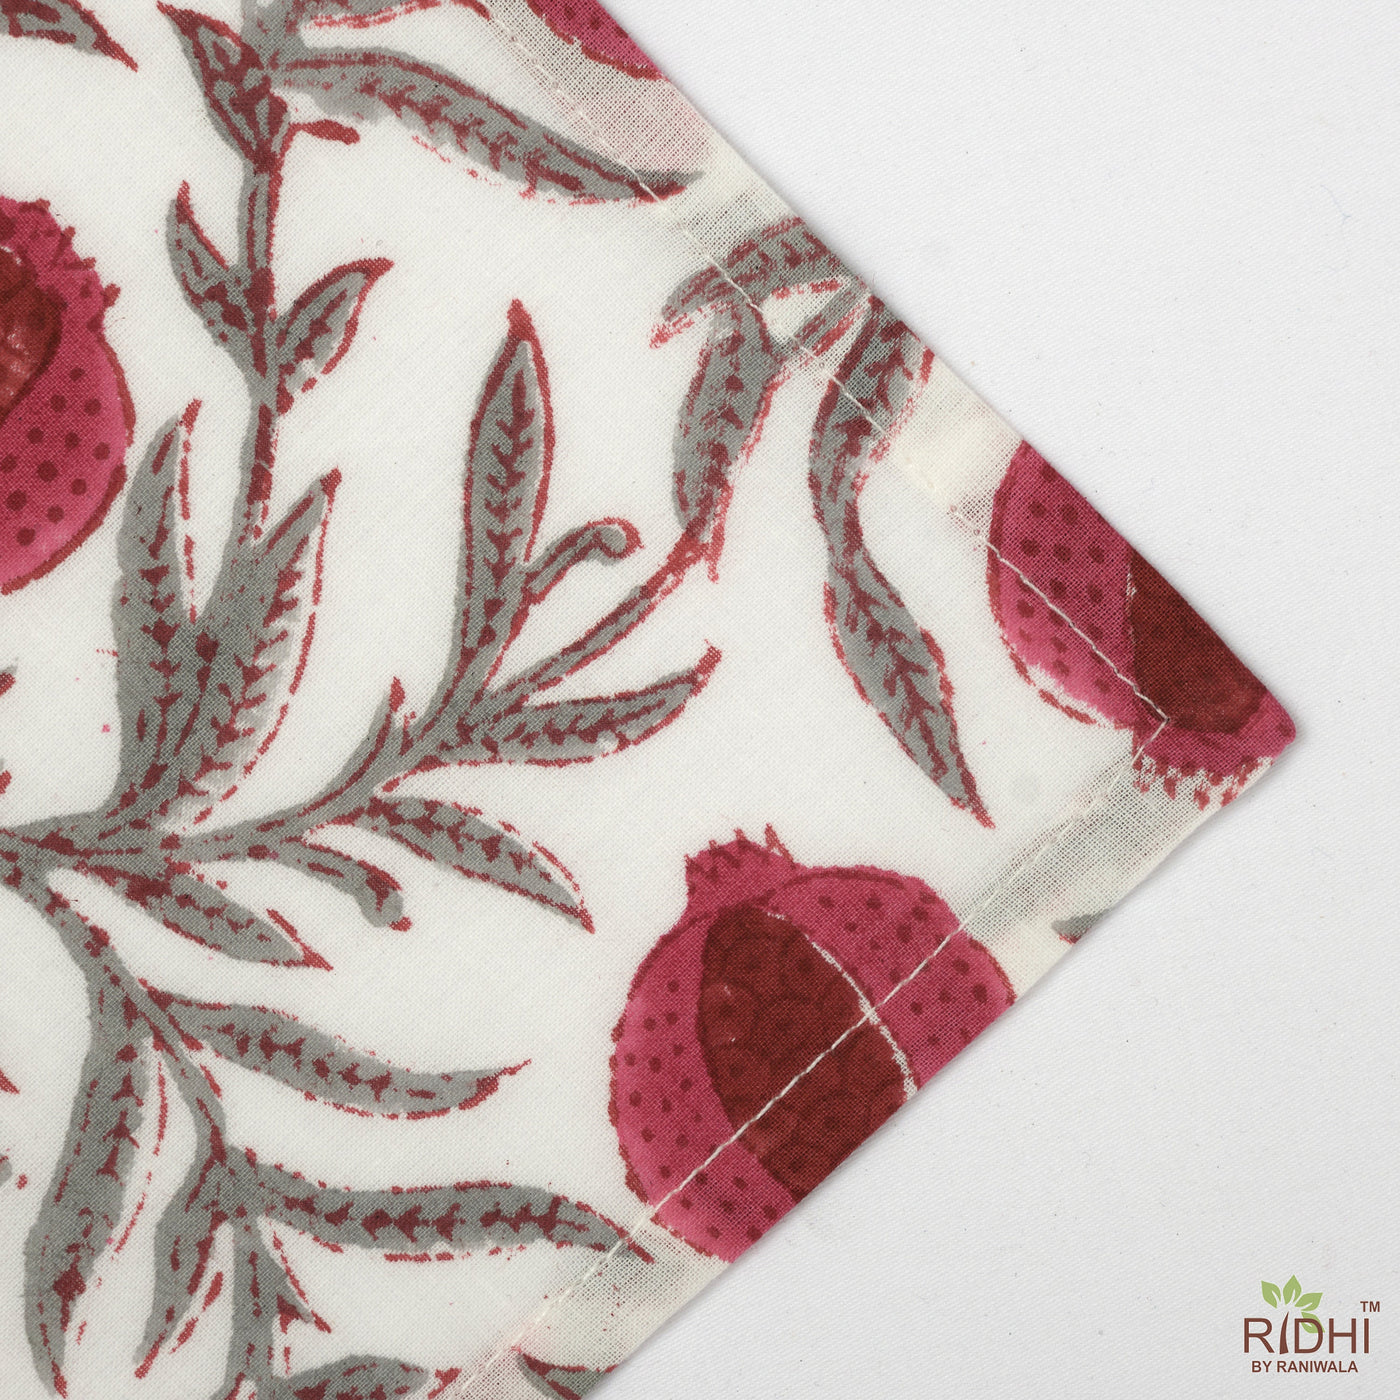 Fabricrush Thulian Pink, Red, Artichoke Green Indian Floral Hand Block Printed Cotton Cloth Napkins, 18x18"- Cocktail Napkins, 20x20"- Dinner Napkins